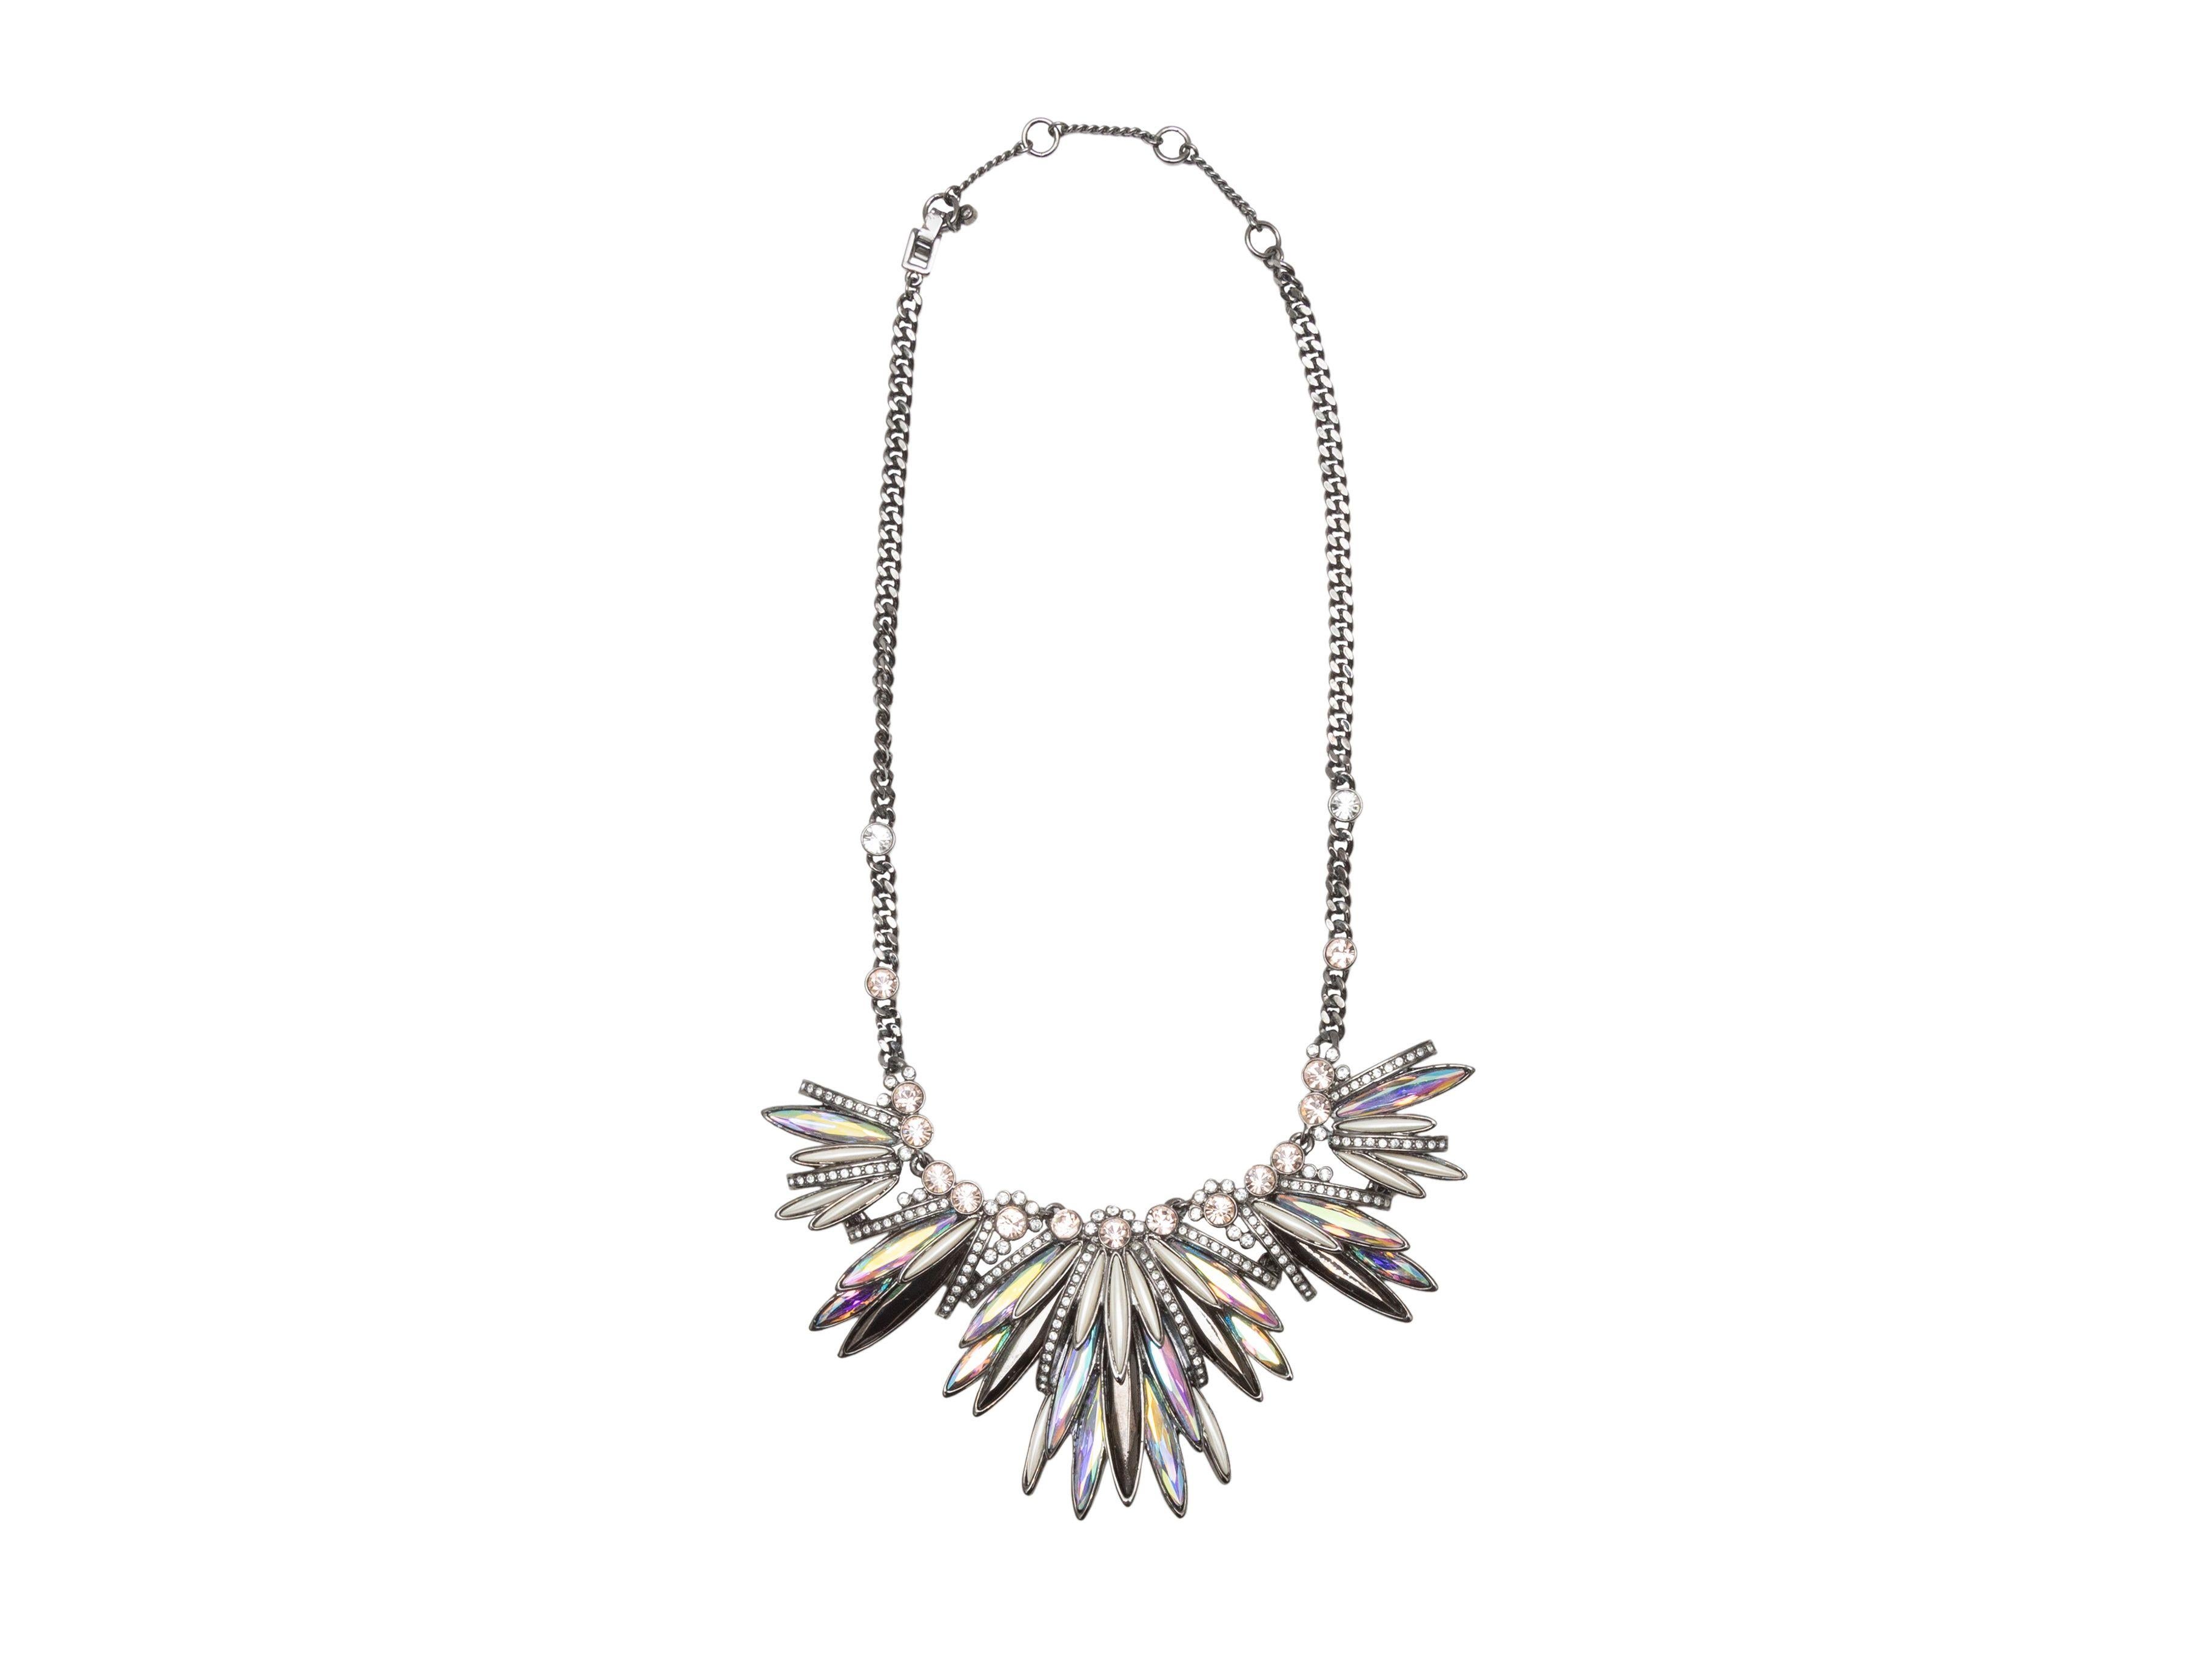 Product Details: Multicolor iridescent rhinestone and hematite statement necklace by Givenchy. Adjustable clasp closure. 10